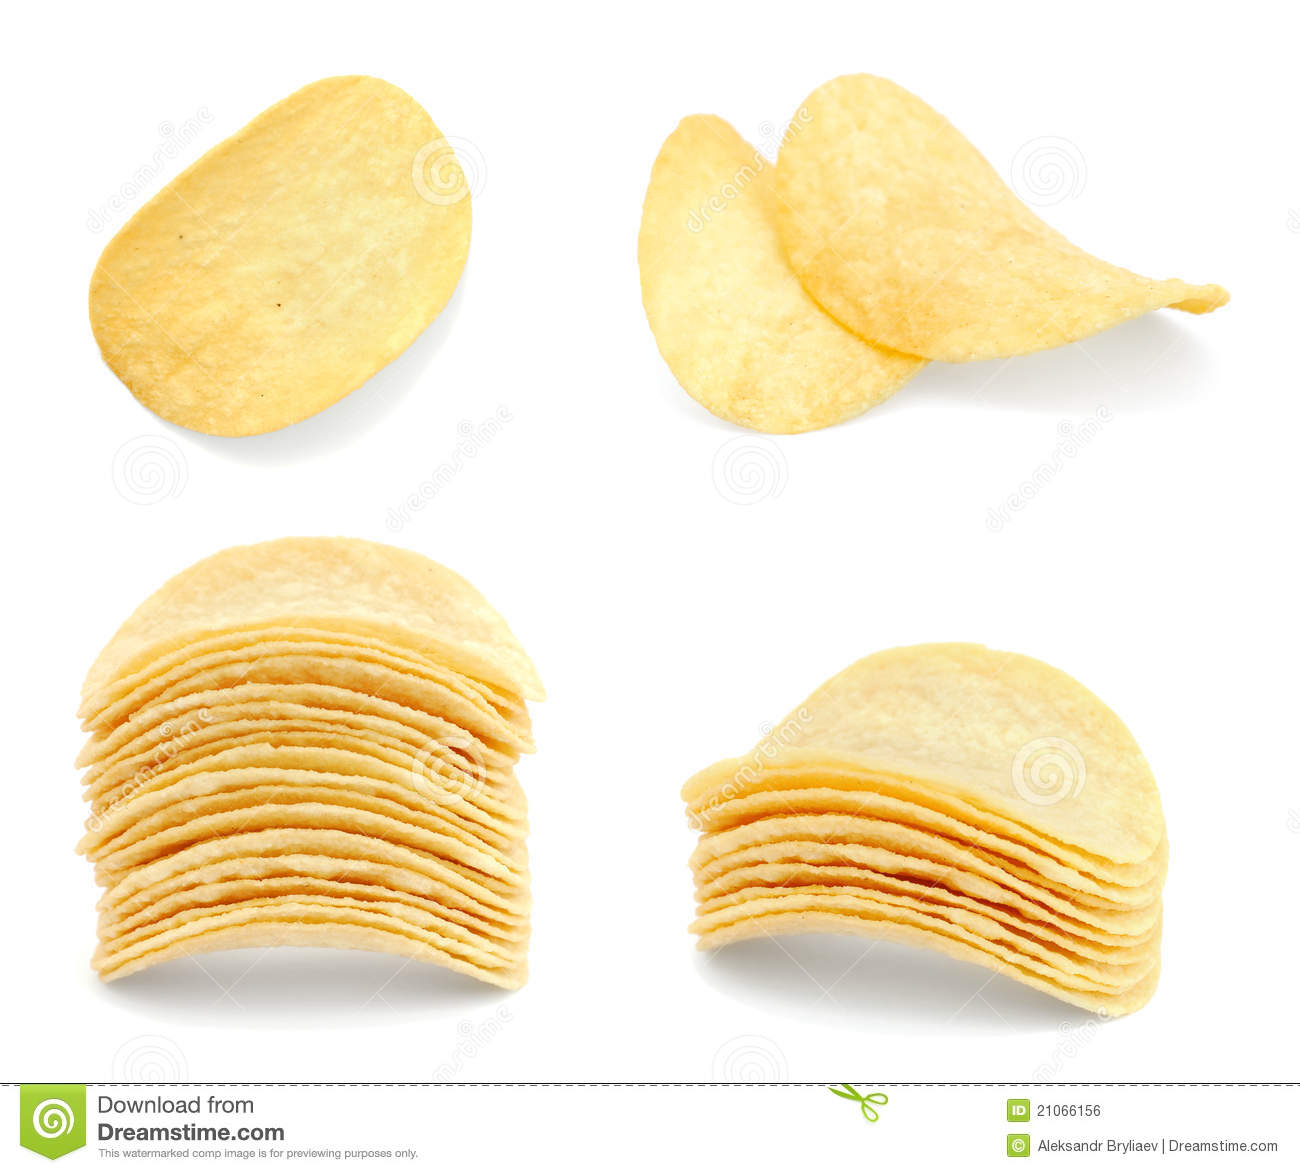 chips clipart vector